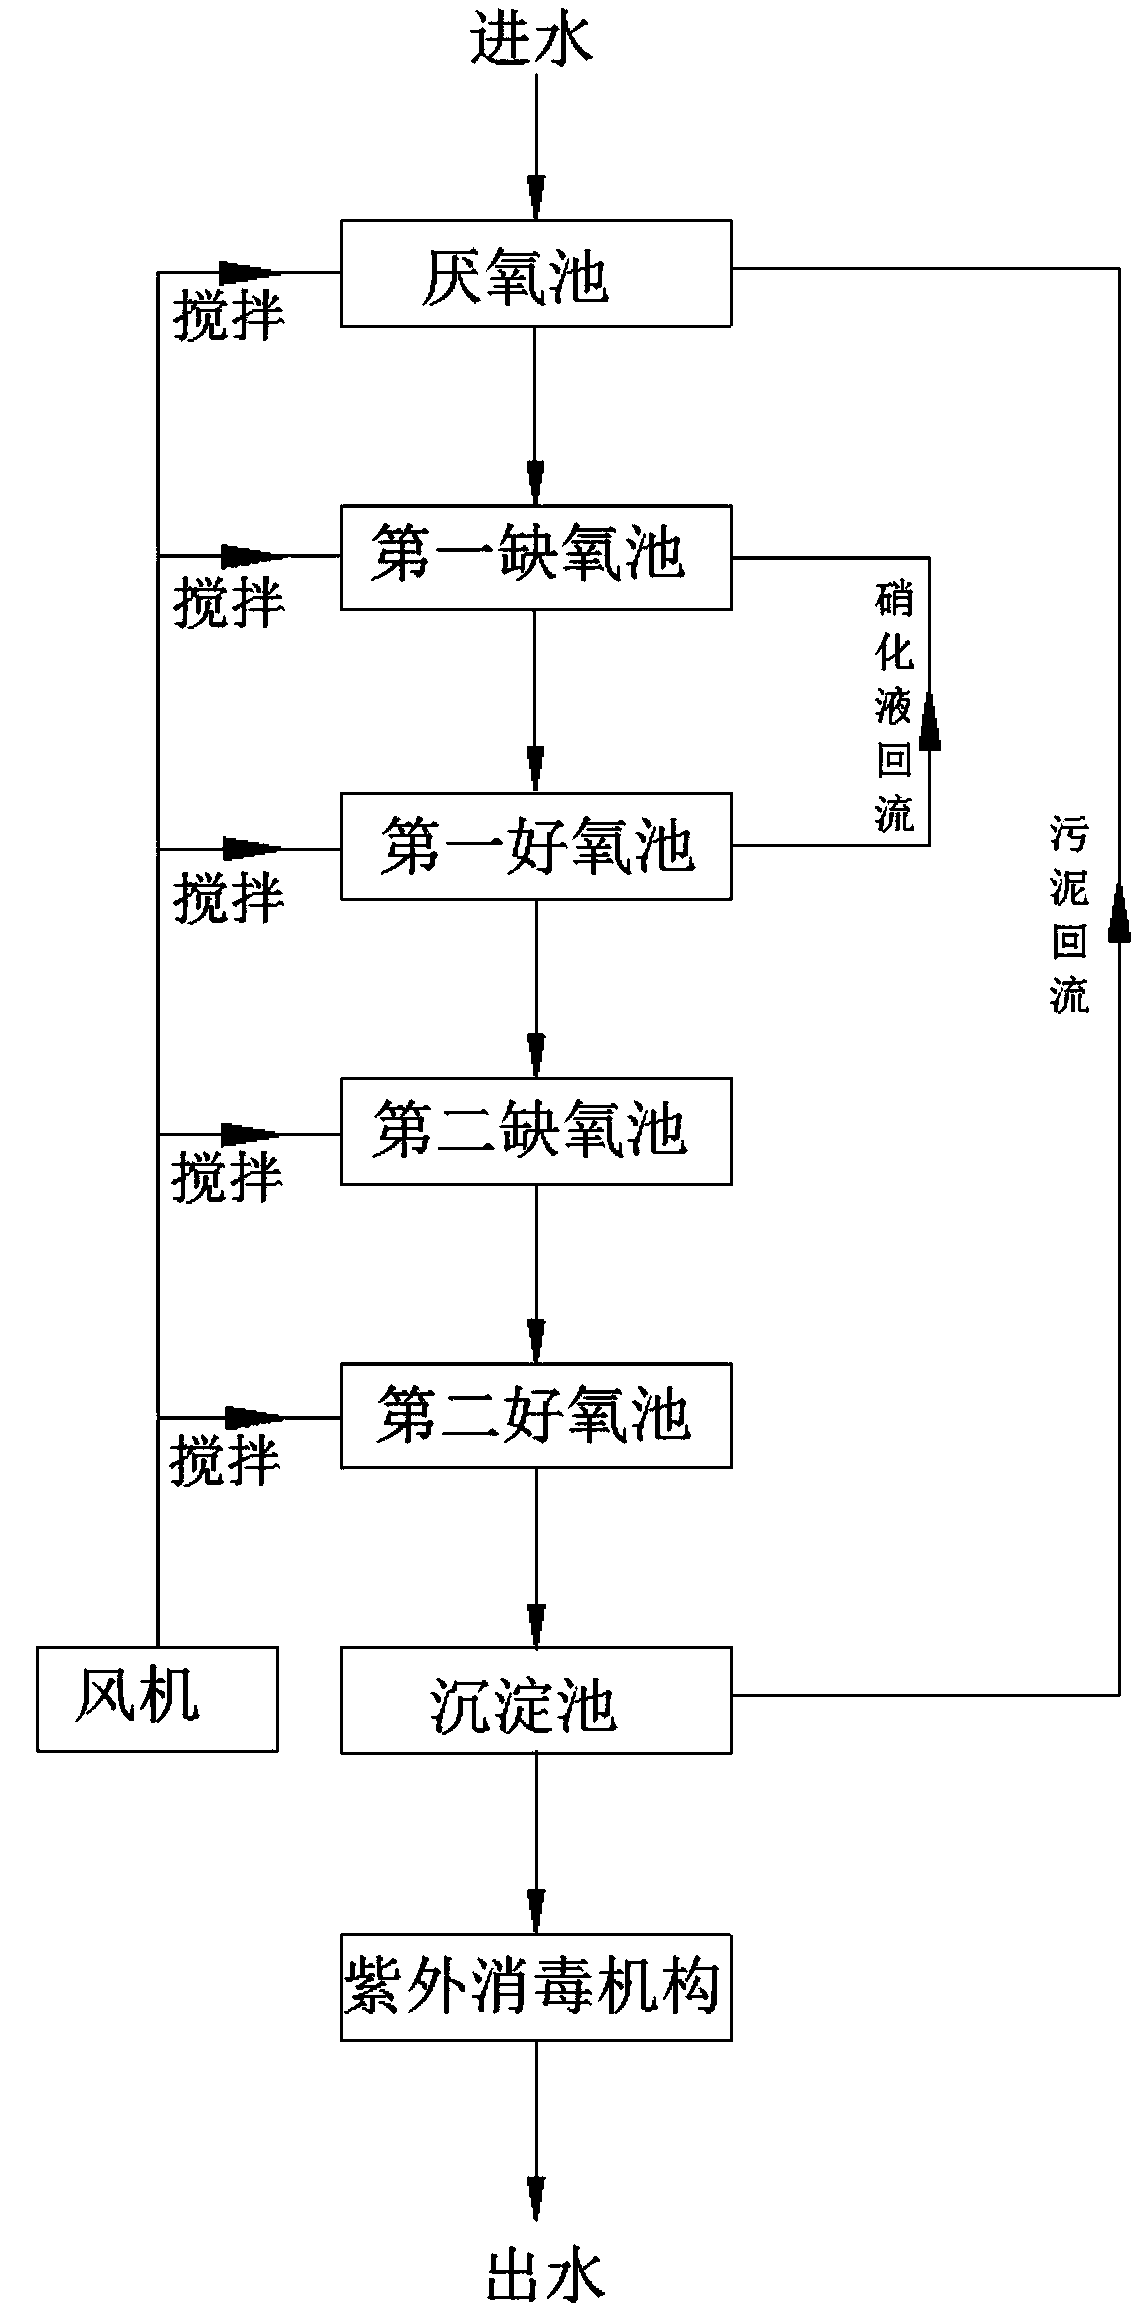 Integrated domestic sewage treatment method and device